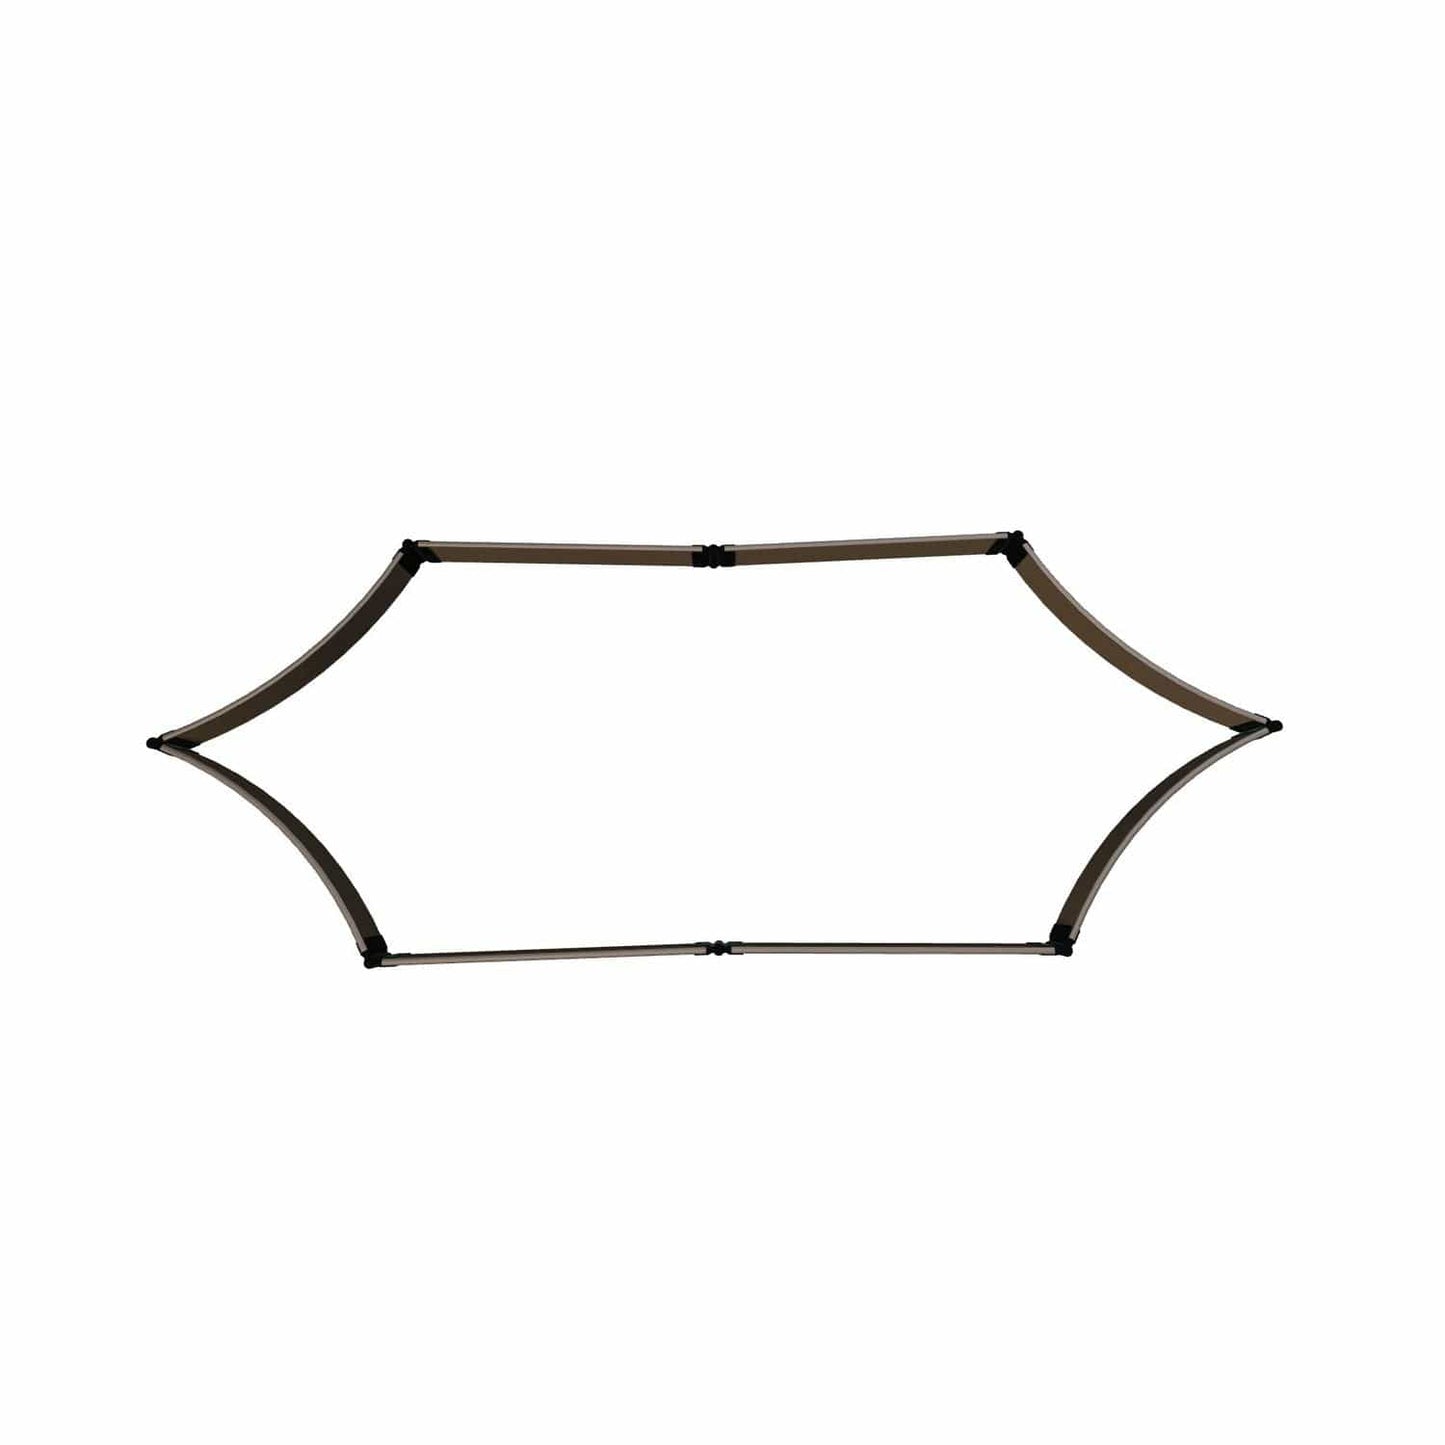 Frame It All Gardening Accessories Frame It All | Tool-Free Silver Salver Scalloped Raised Garden Bed 6' X 16' X 5.5" - Uptown Brown - 1" Profile 800001068